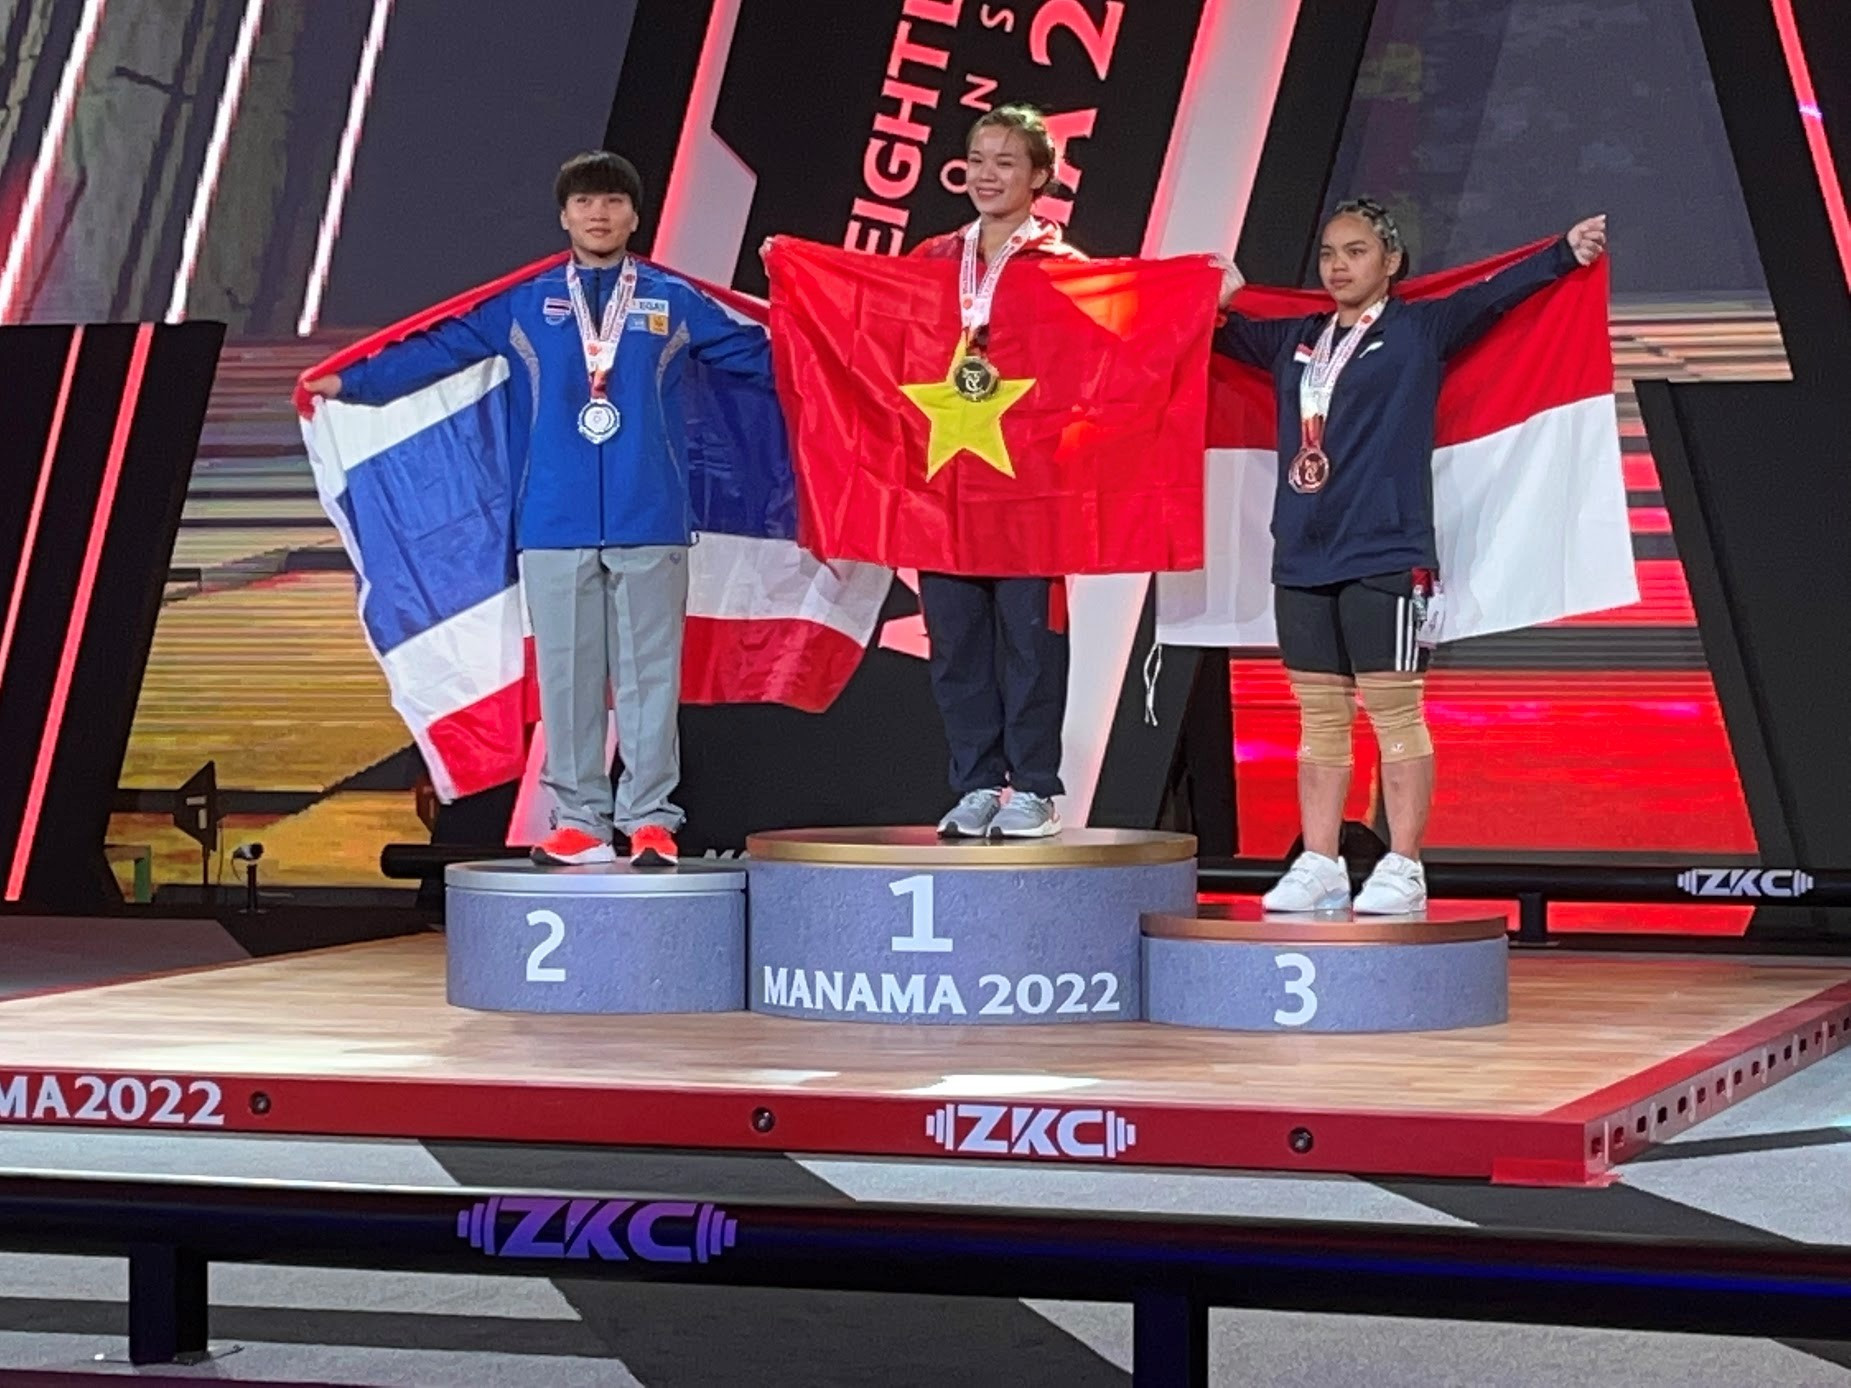 Pham Thi Hong of Vietnam was the gold medallist in the women's 64kg©Brian Oliver